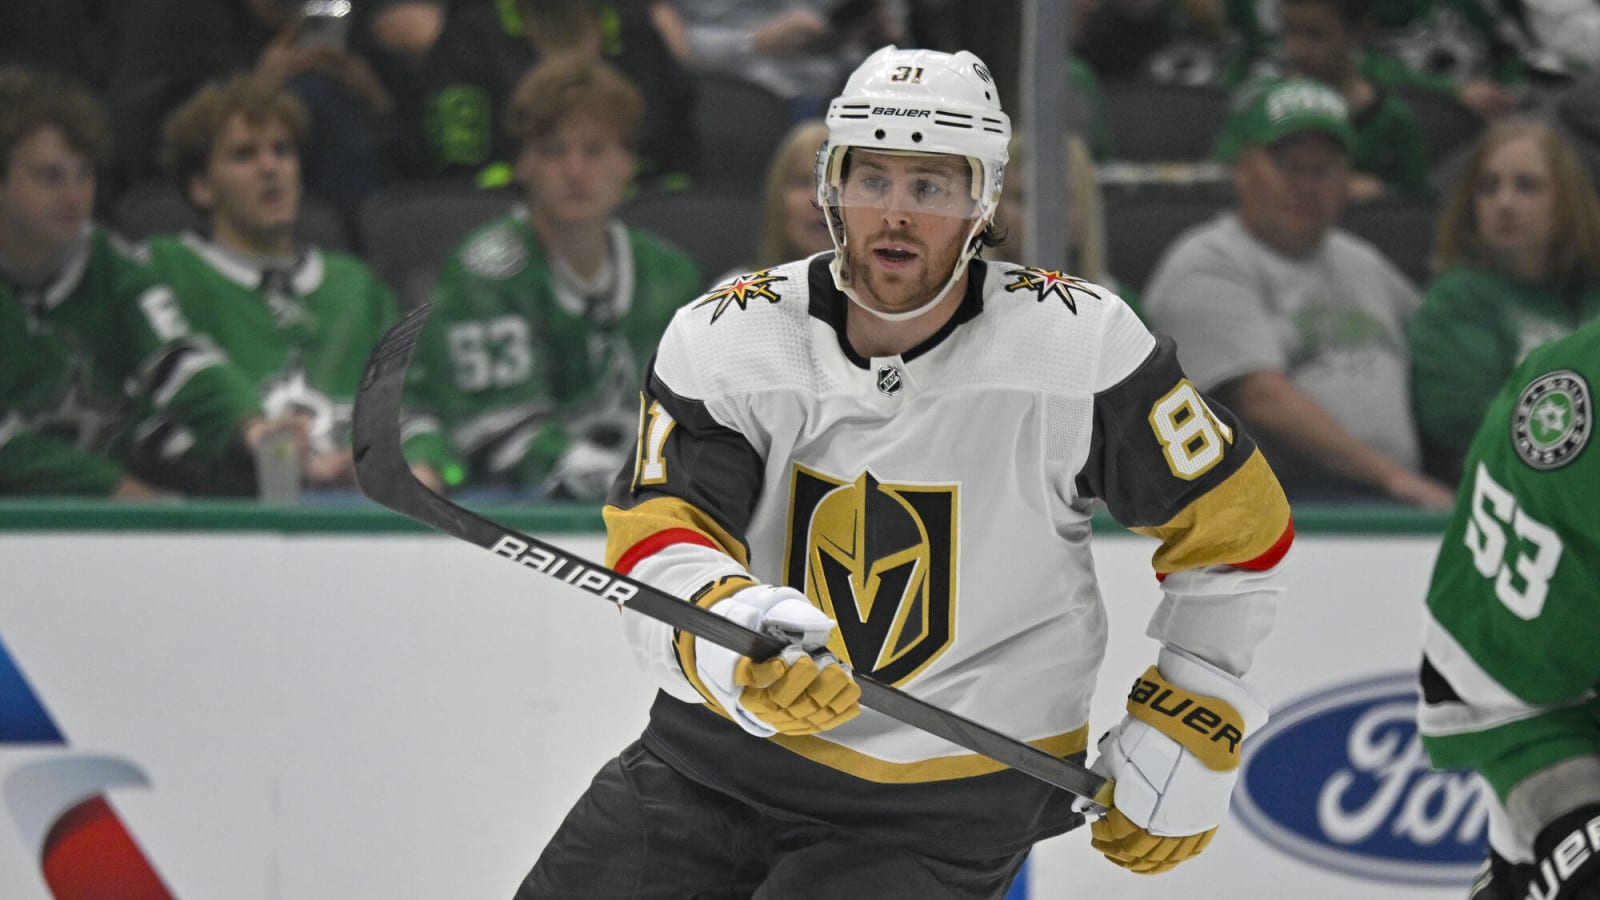 Marchessault on the second A.N.: Alexandre Daigle sharply criticizes Bruce Cassidy